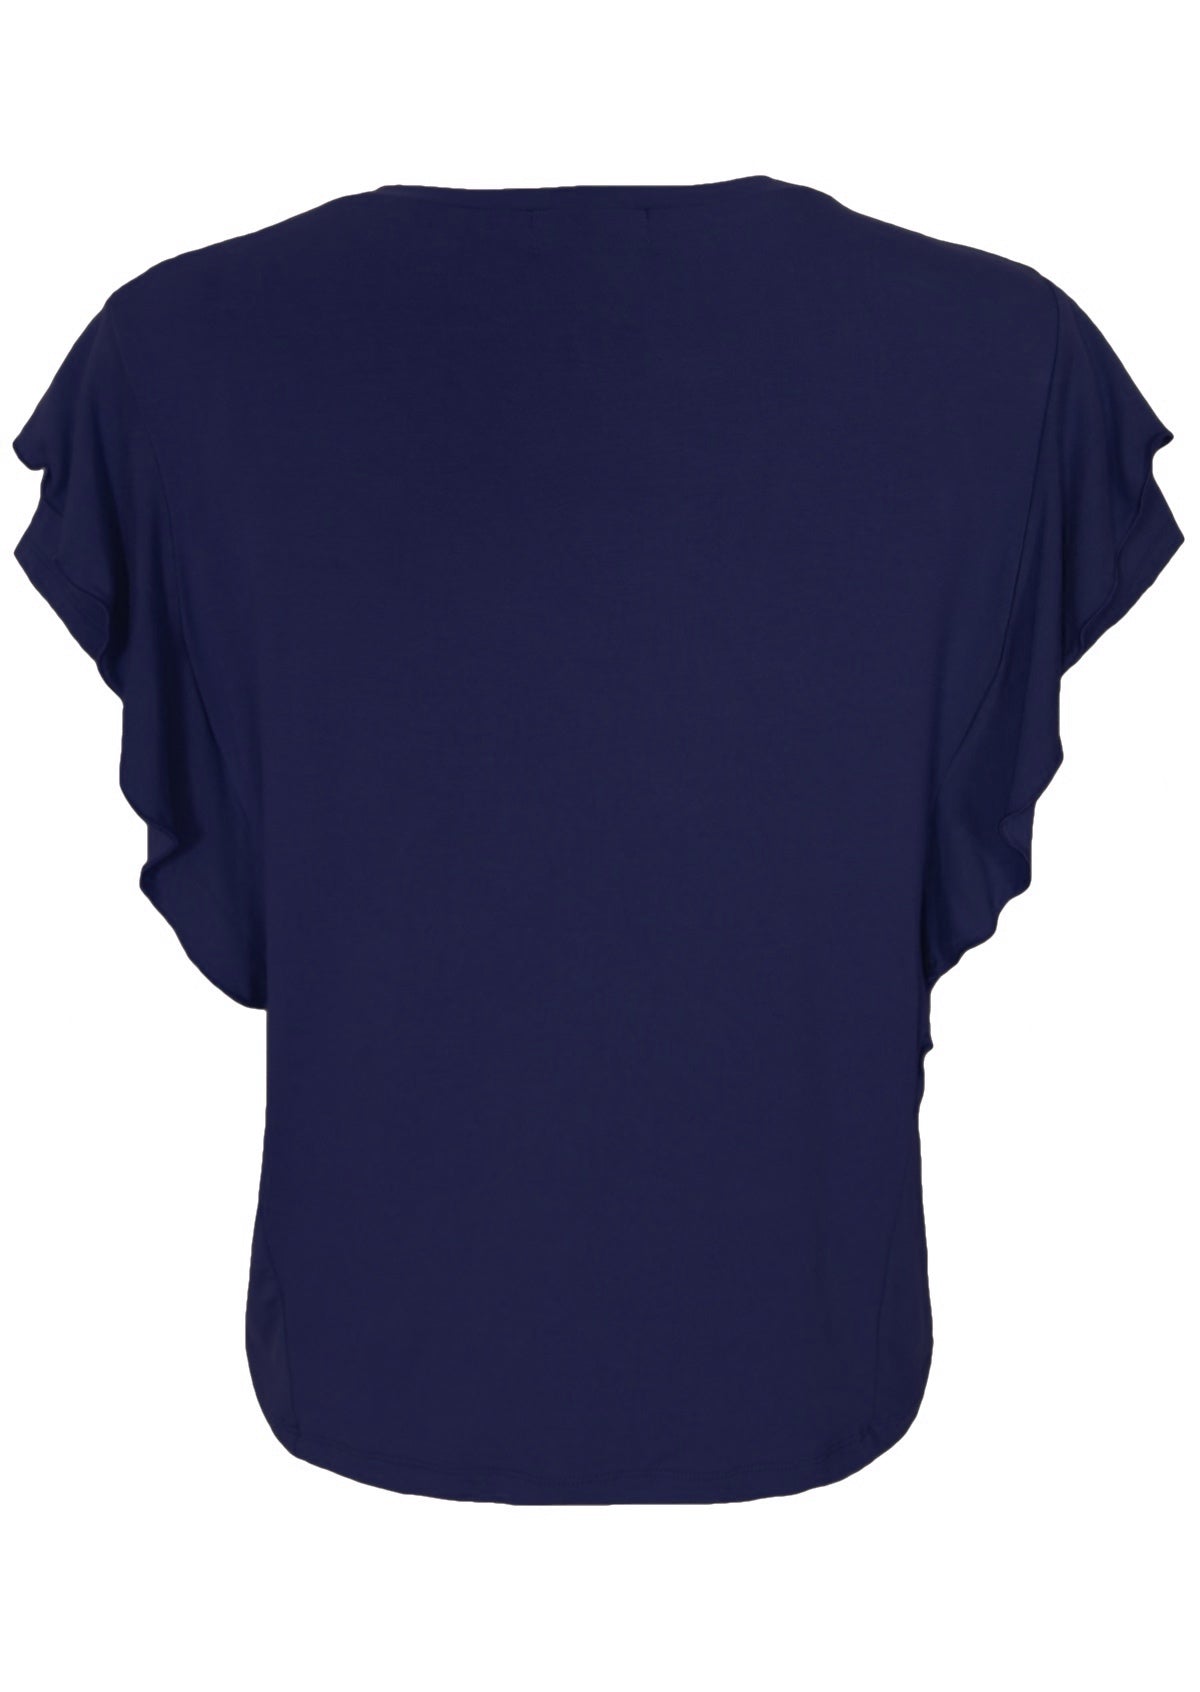 Back view of a navy blue ruffle rayon top.